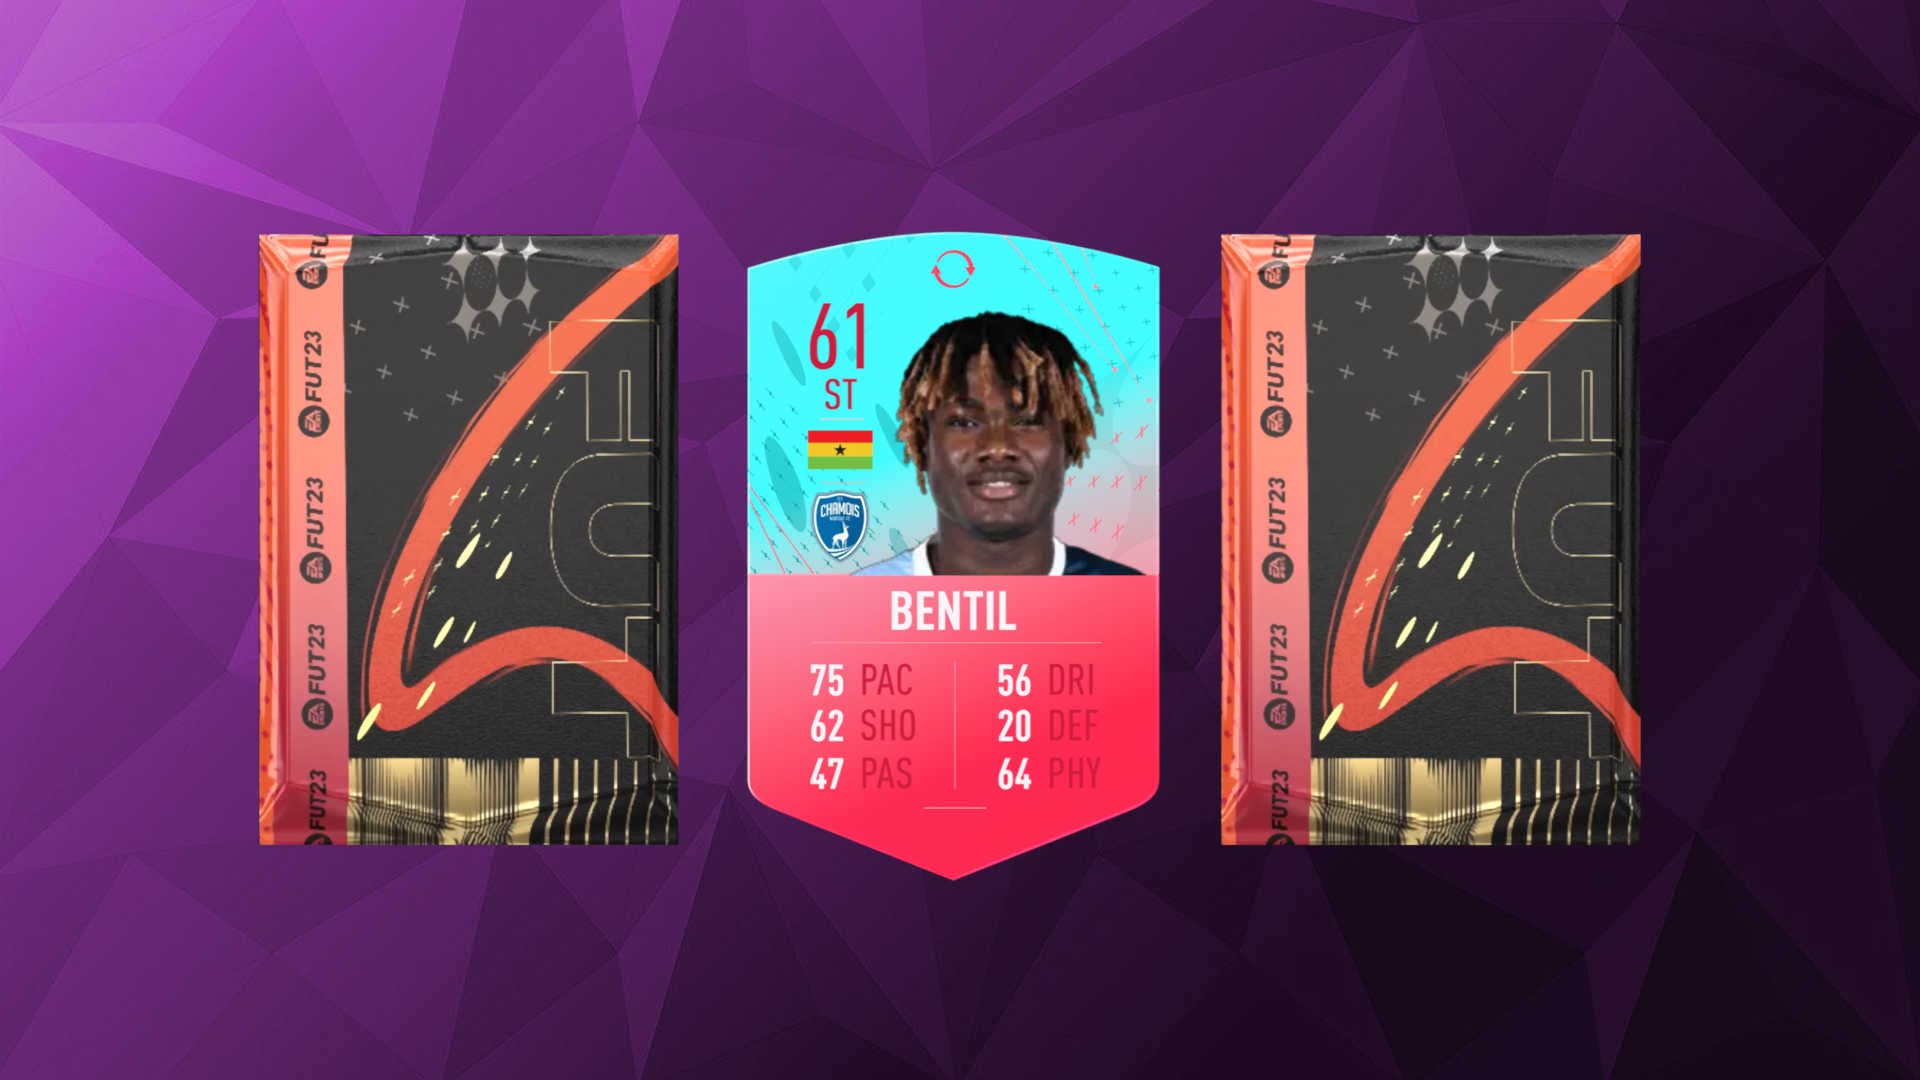 FIFA 23: First Acquisition Party improves its rewards and also includes a FUT Anniversary Token